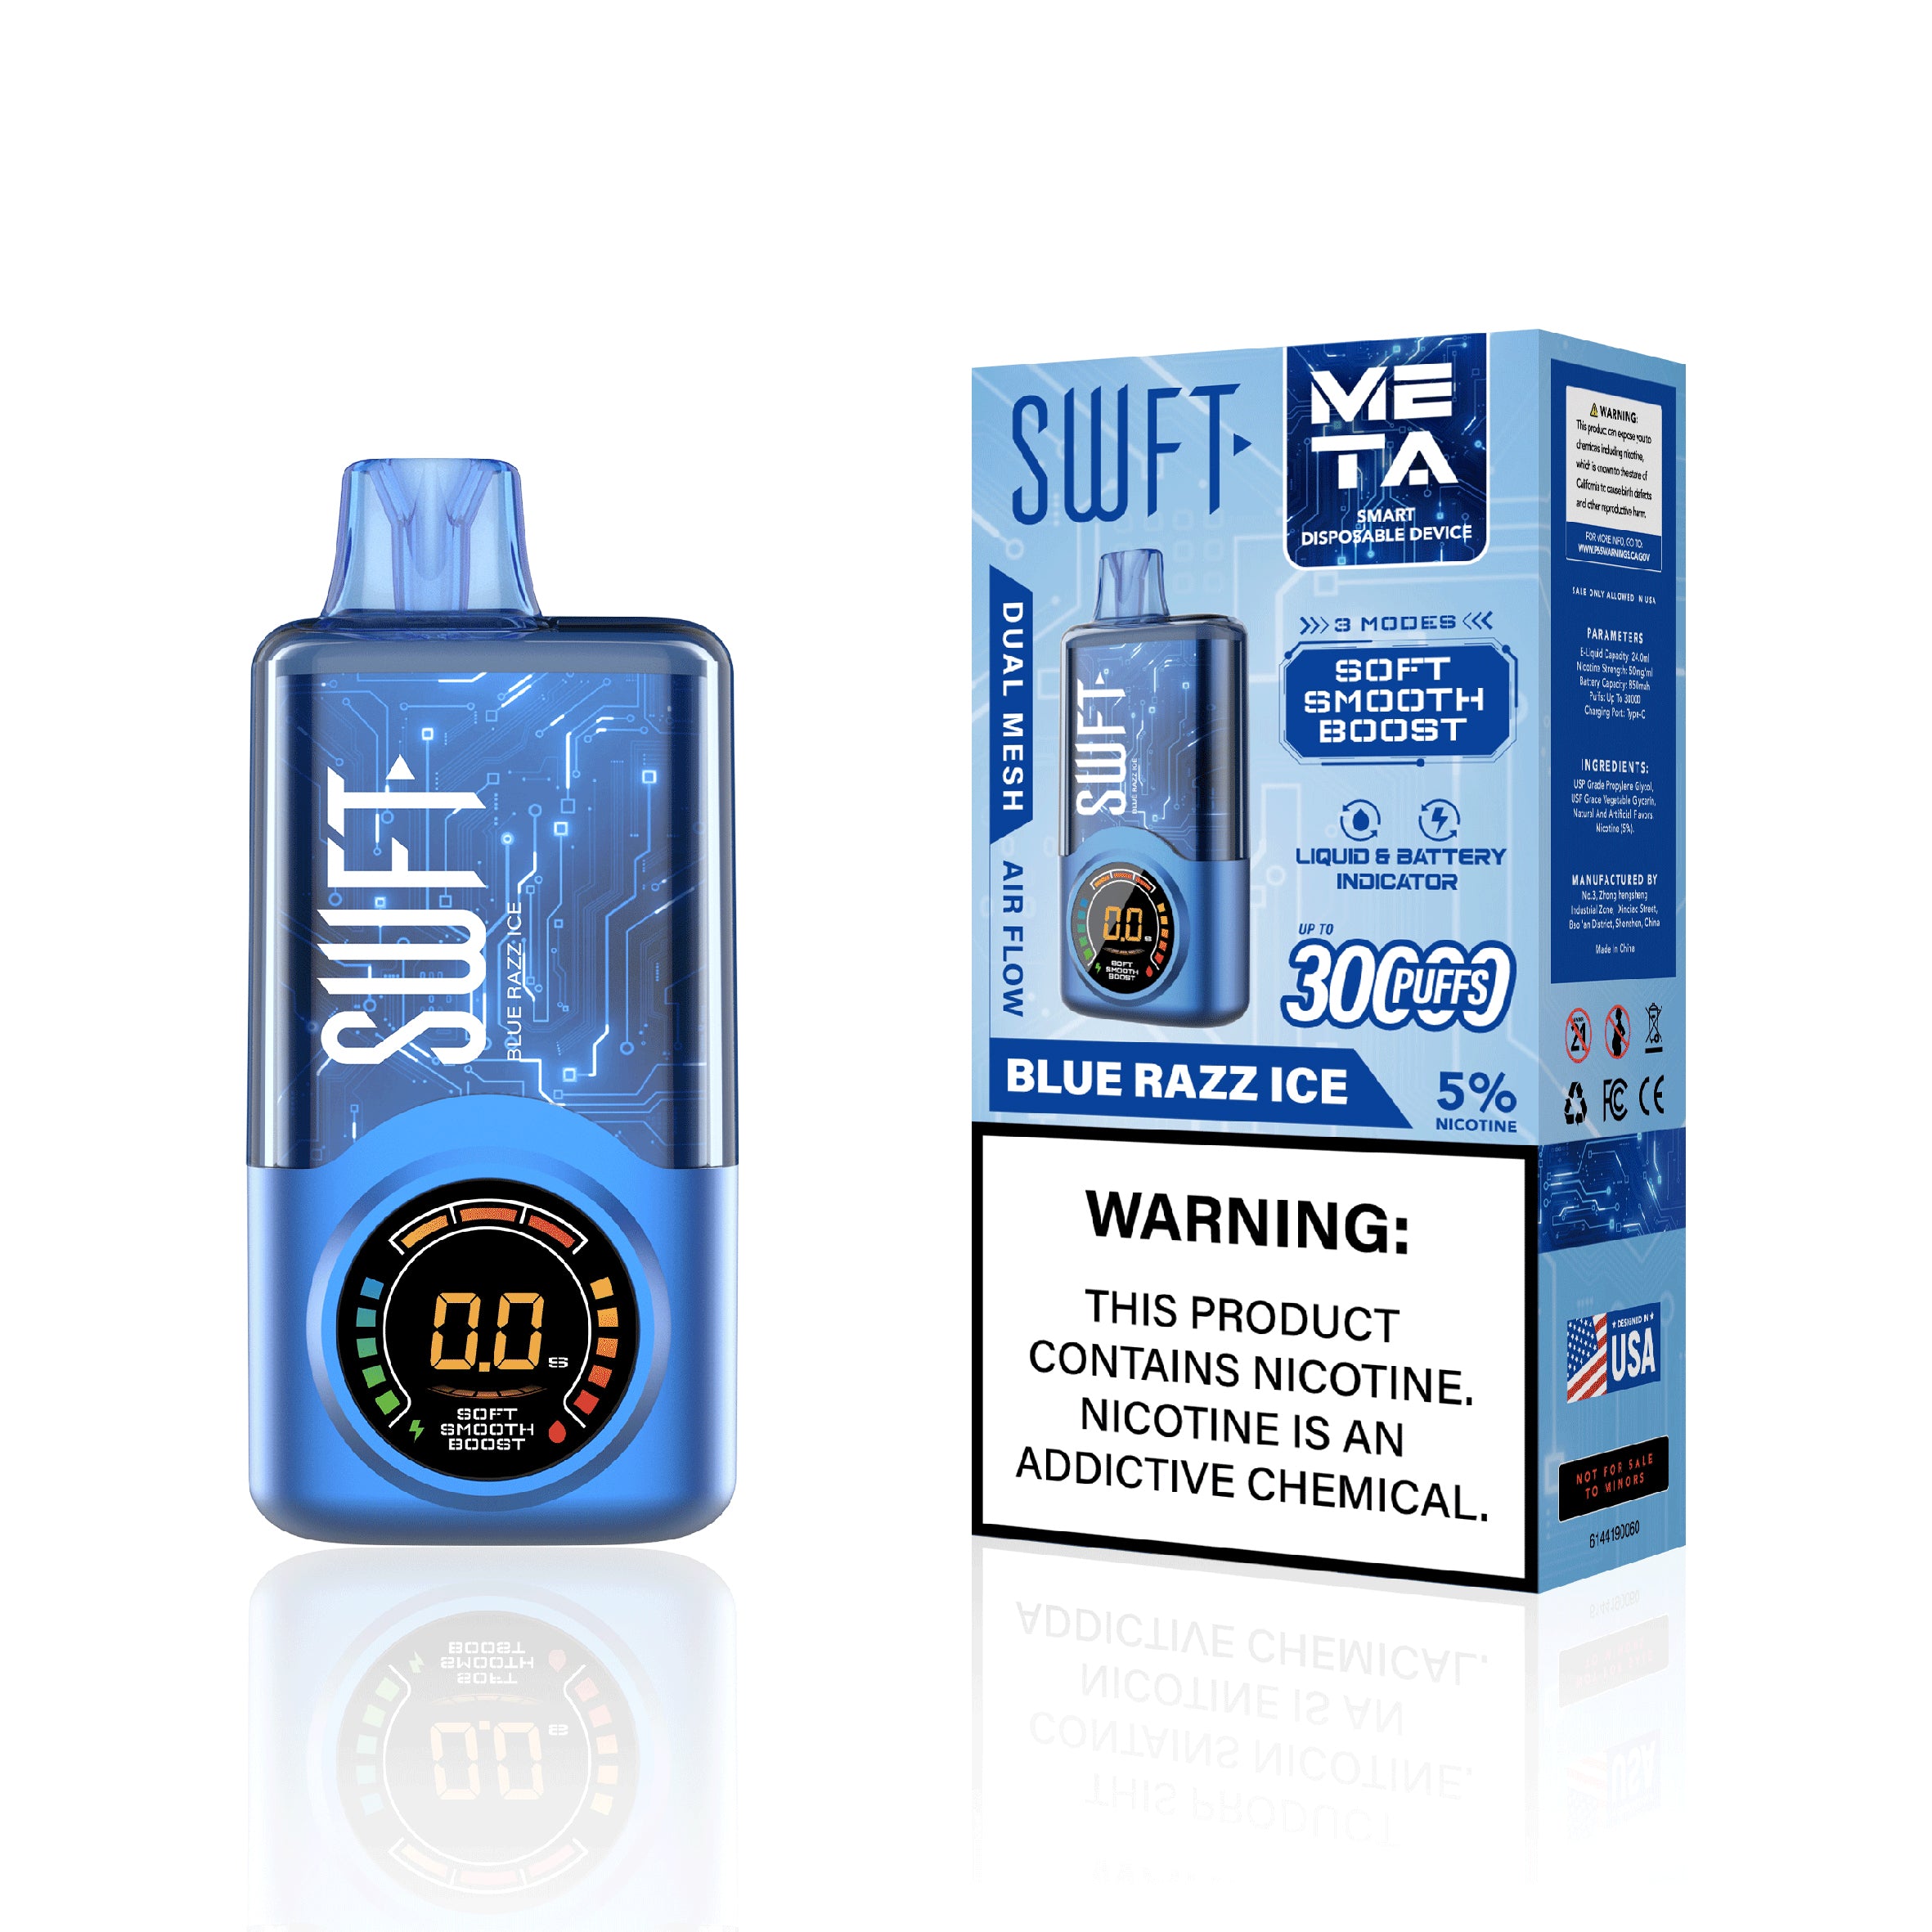 SWFT META 30000 PUFFS ADJUSTABLE WATTAGE DISPOSABLE VAPE DEVICE DUAL MESH COIL LIQUID AND BATTERY INDICATOR BLUE RAZZ ICE